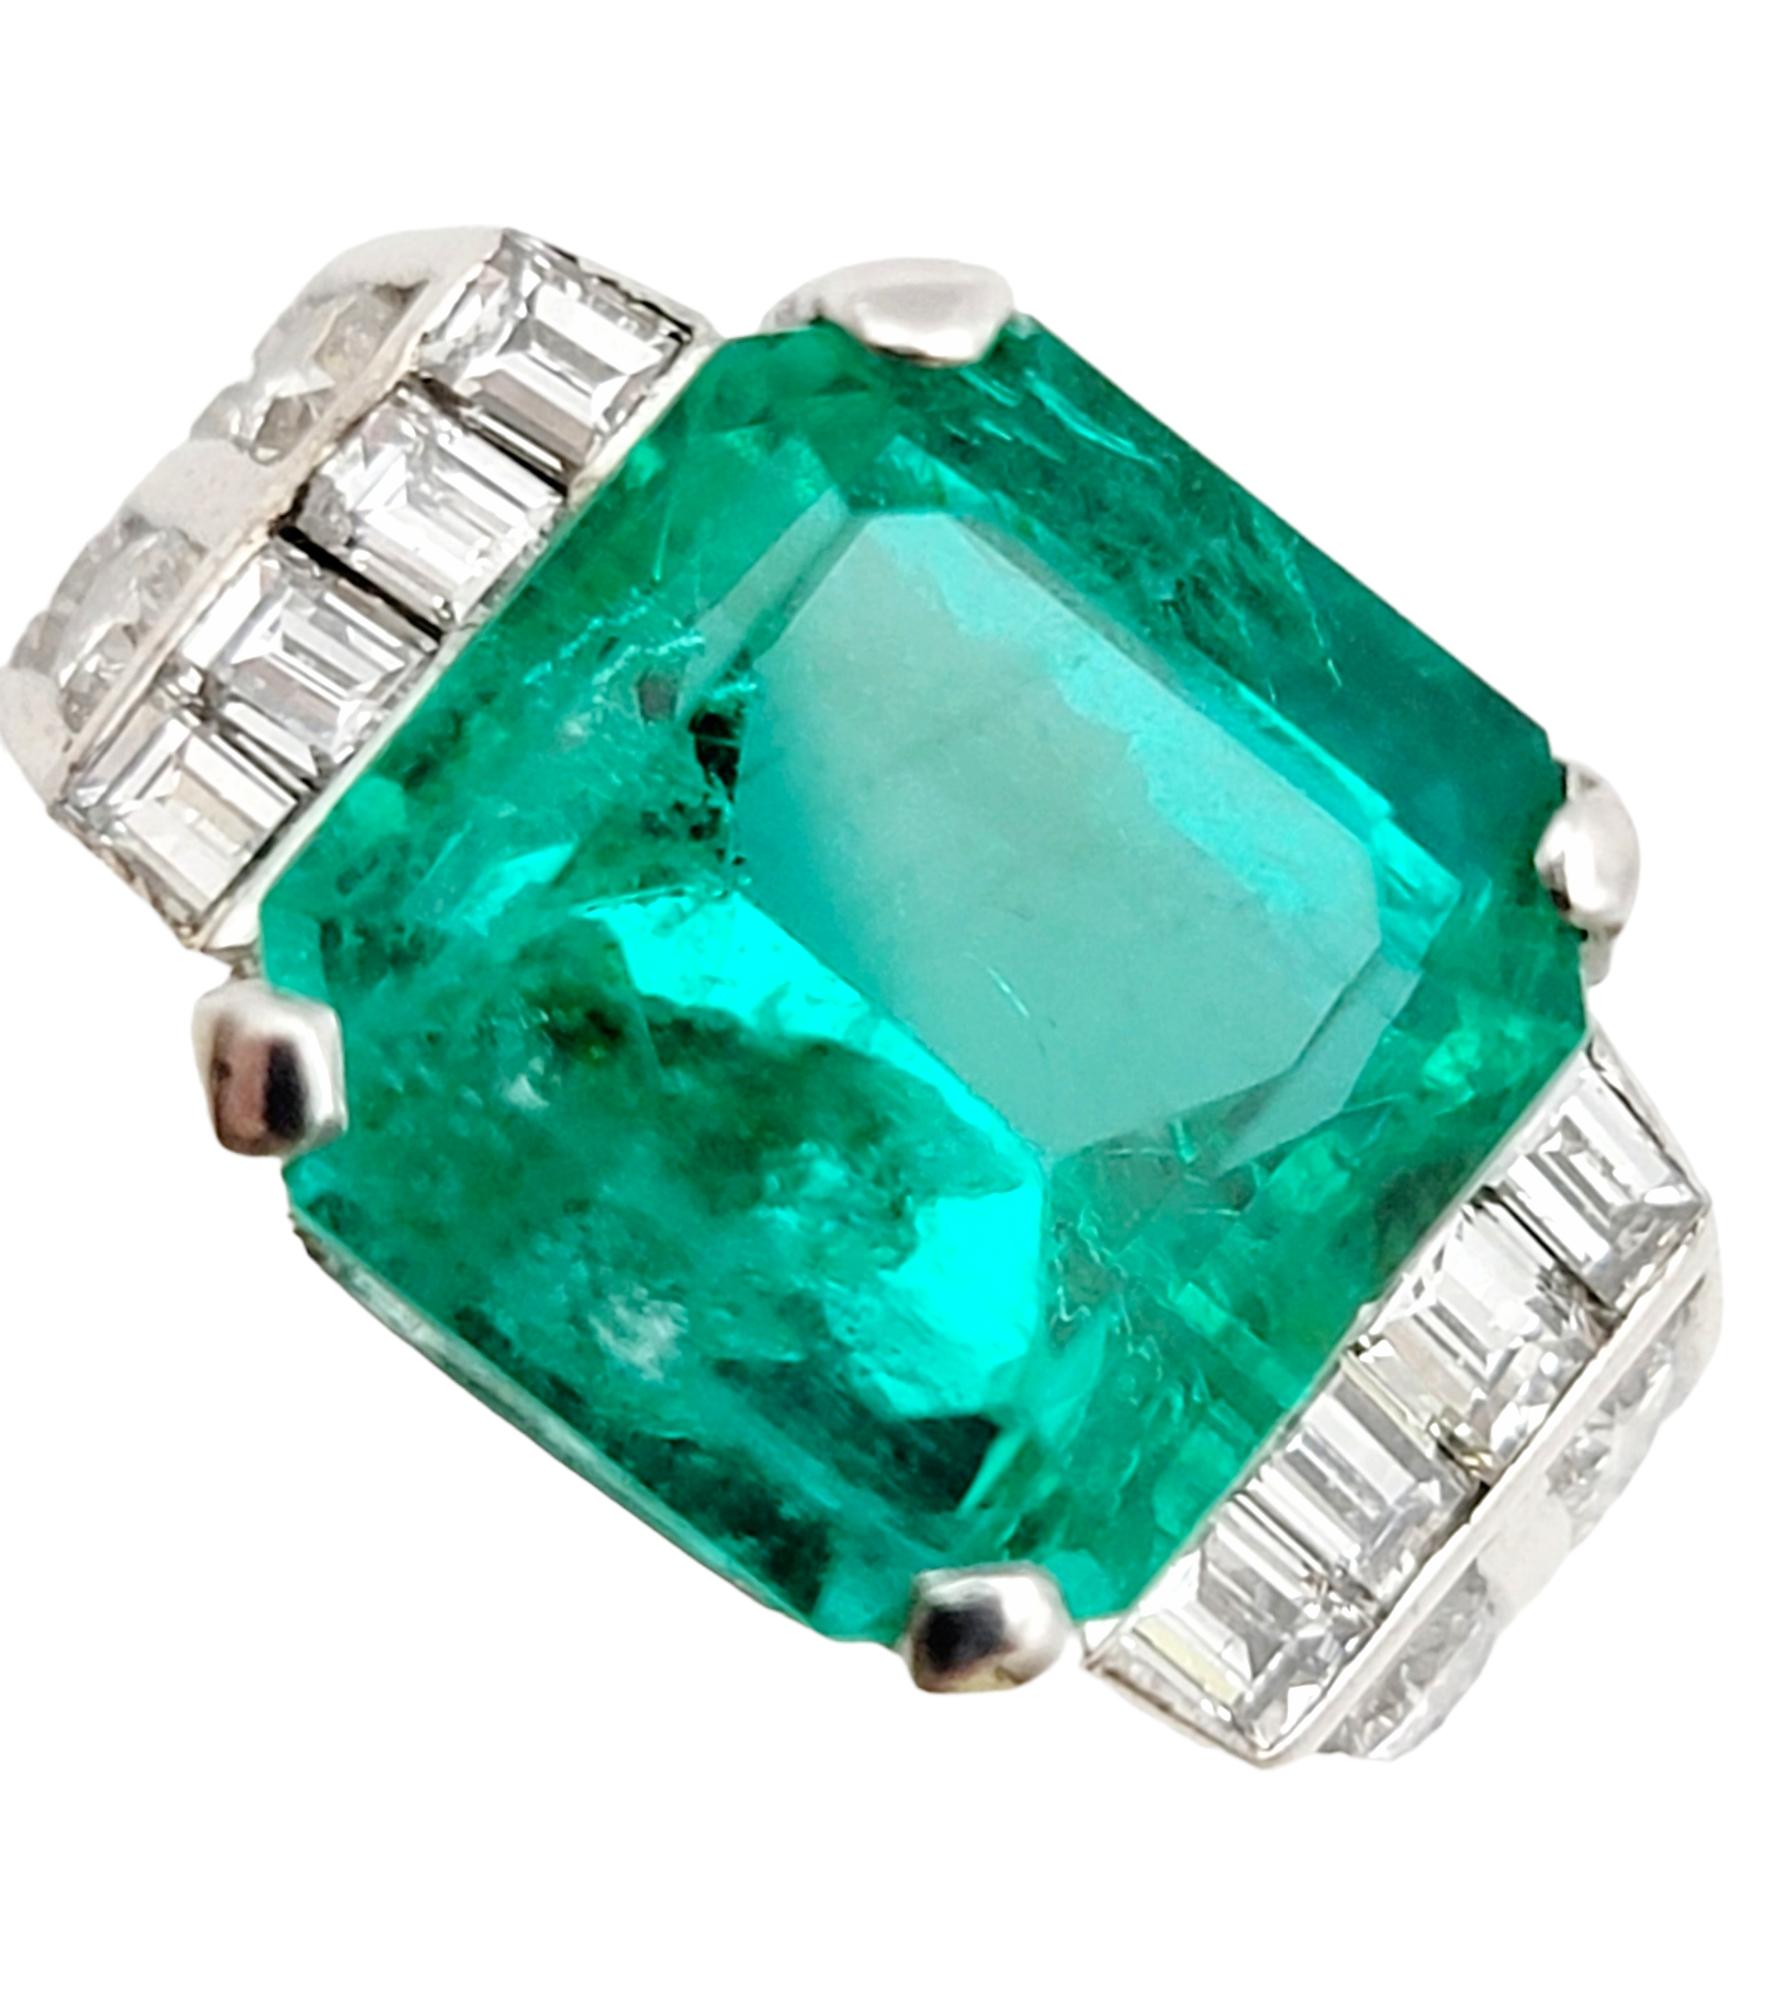 Ring size: 6.25

This breathtaking natural emerald and diamond ring absolutely wows! The brilliant bright green emerald stone pops beautifully against the bright white diamonds and really catches the viewers eye. 

The gorgeous ring features a